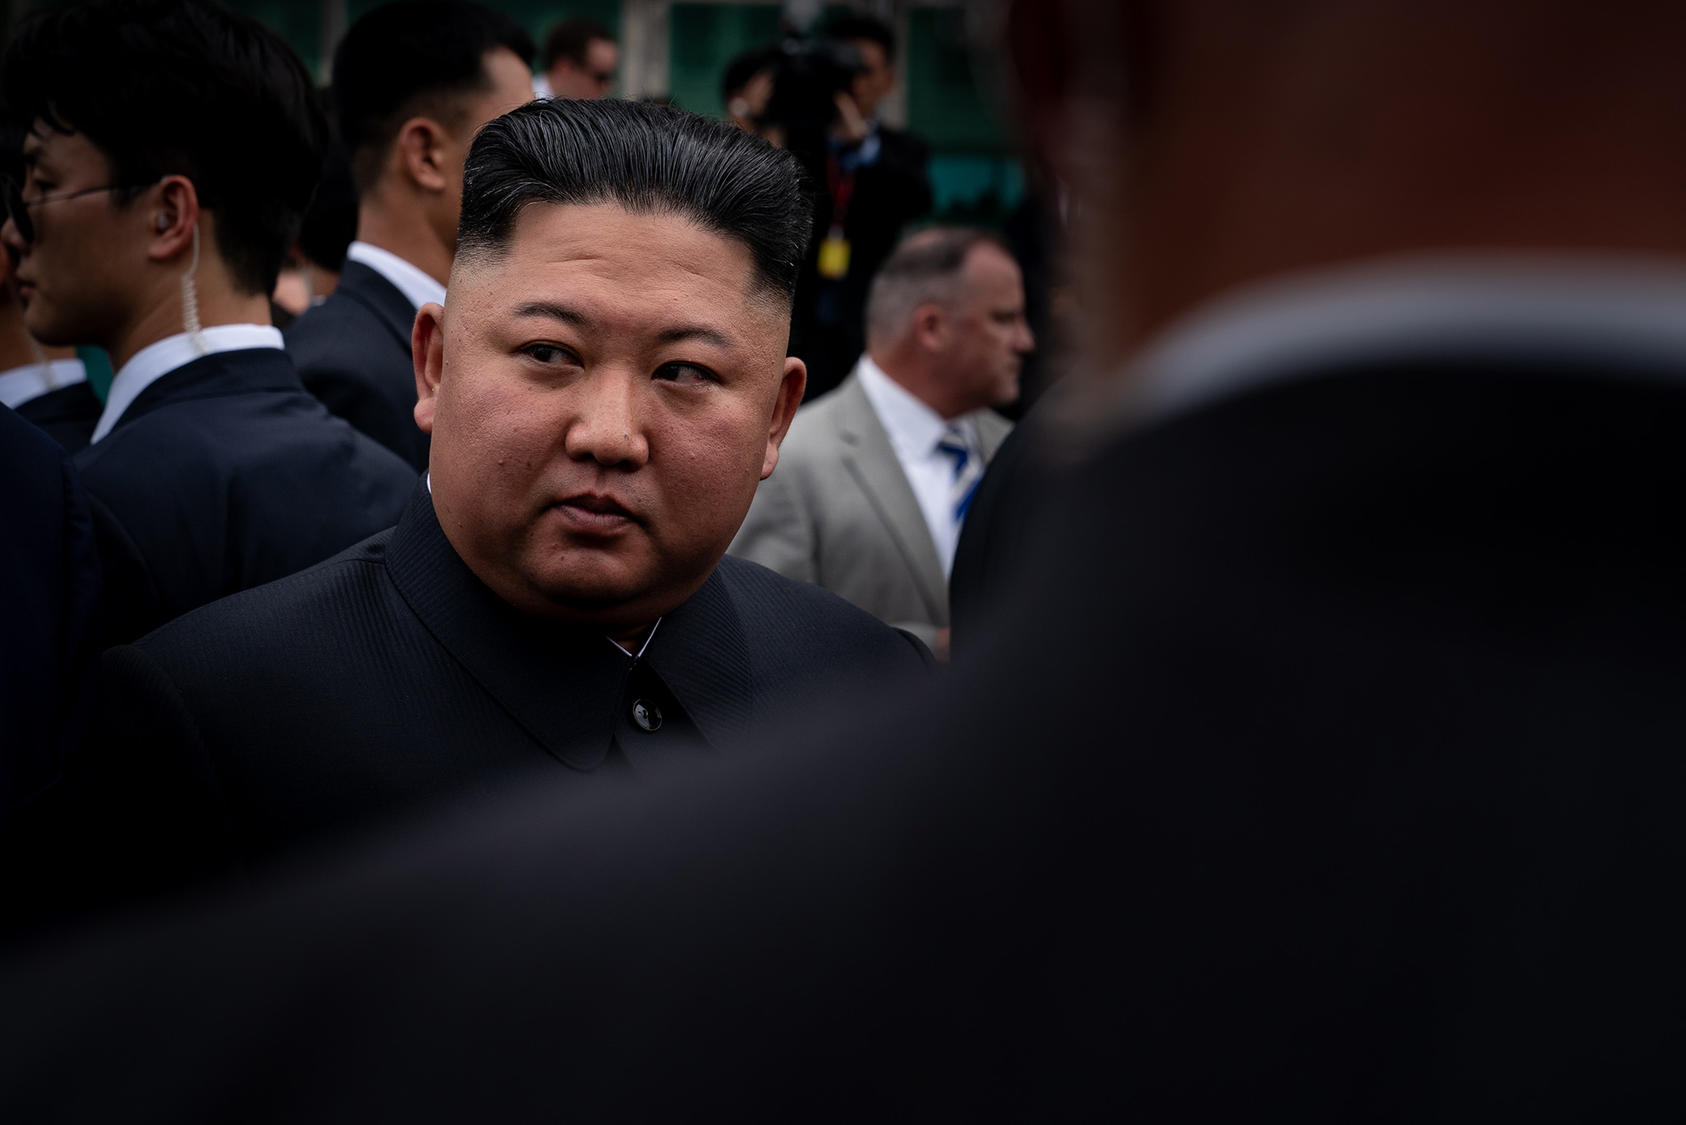 Kim Jong Un, the North Korean leader, while meeting with President Donald Trump in the truce village of Panmunjom in the Demilitarized Zone, June 30, 2019. (Erin Schaff/The New York Times)